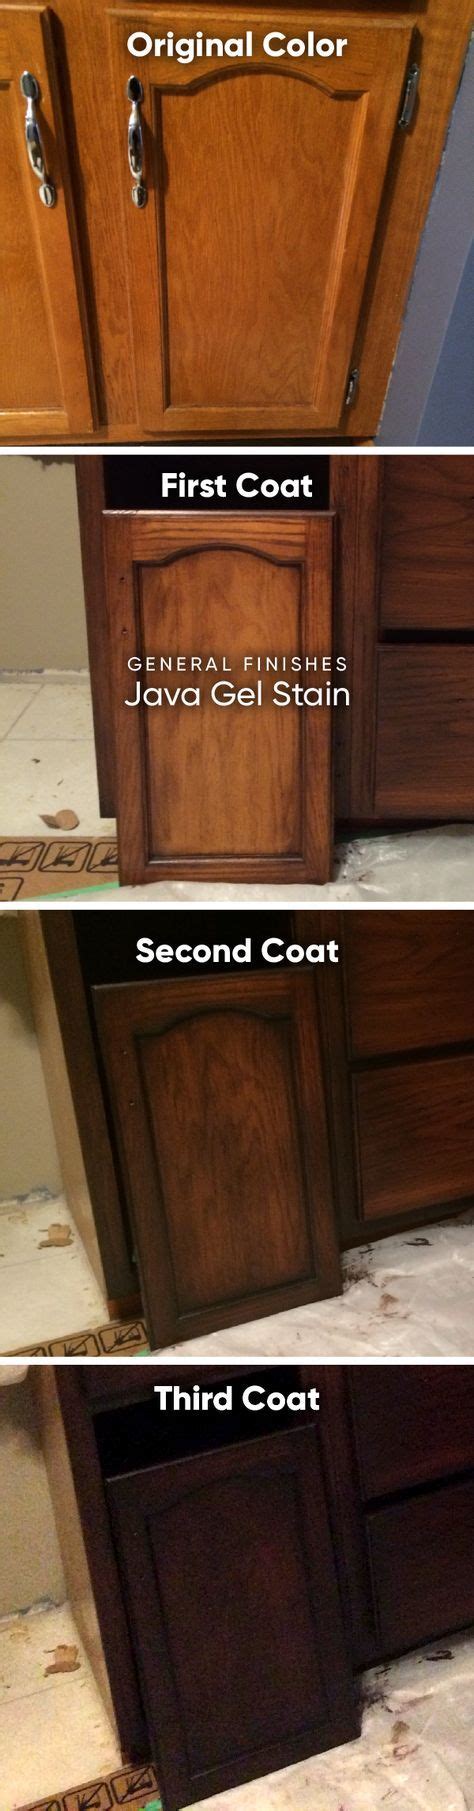 Jul 19, 2020 · gain inspiration with these painted and stained oak projects that will help love your home again. General Finishes Gel Stain, Java | General finishes gel ...